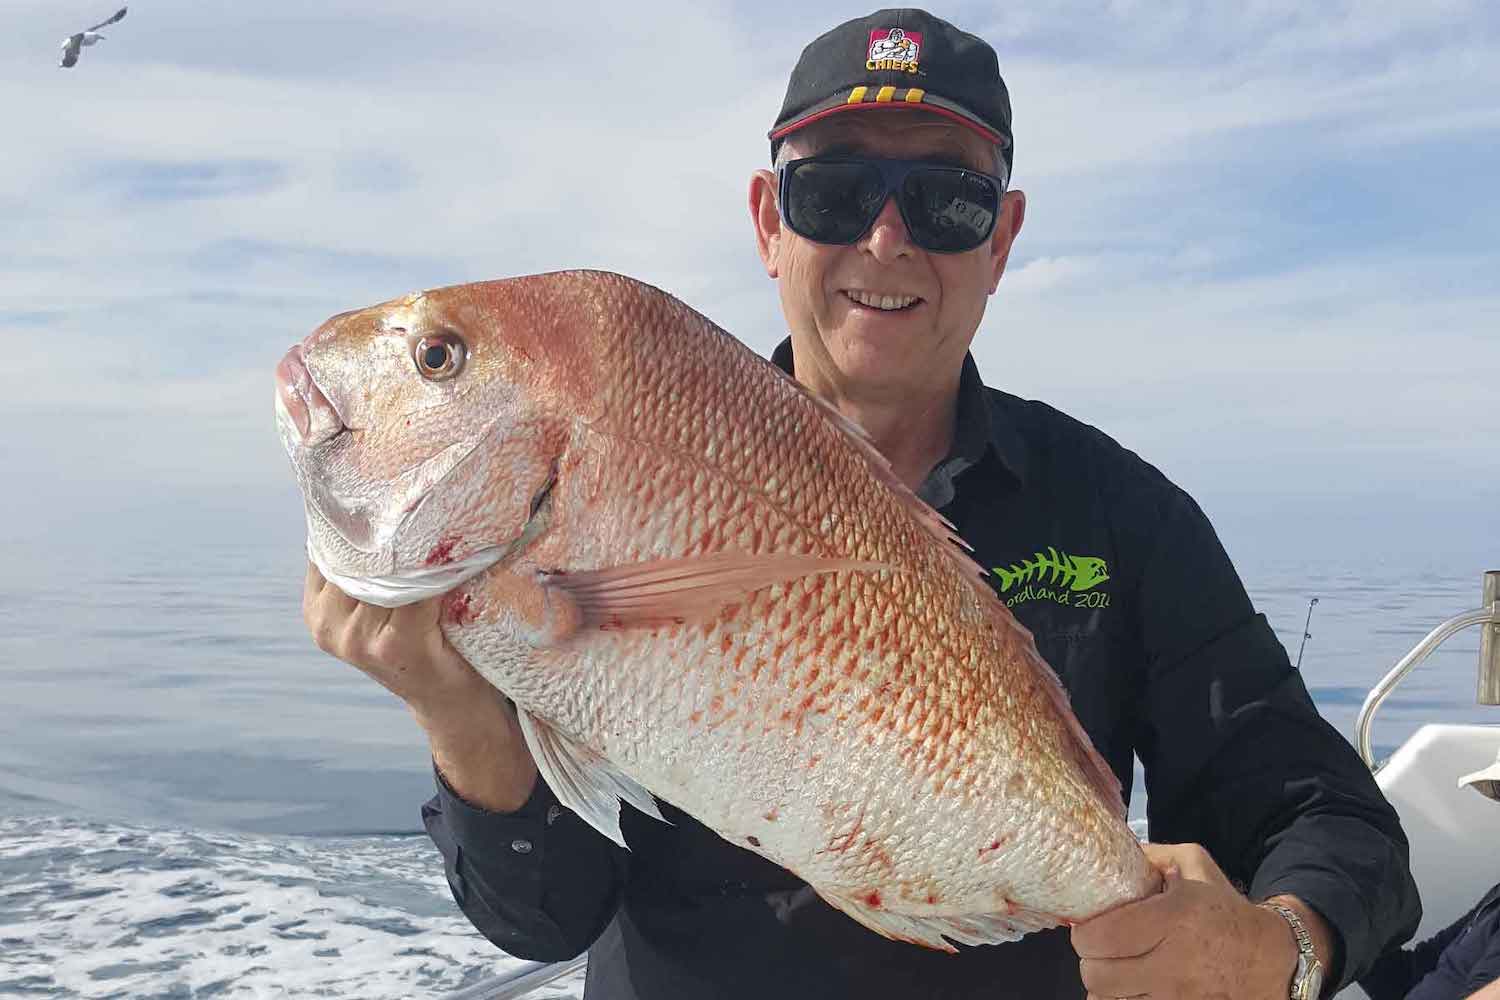 A large snapper caught onboard the Galileo